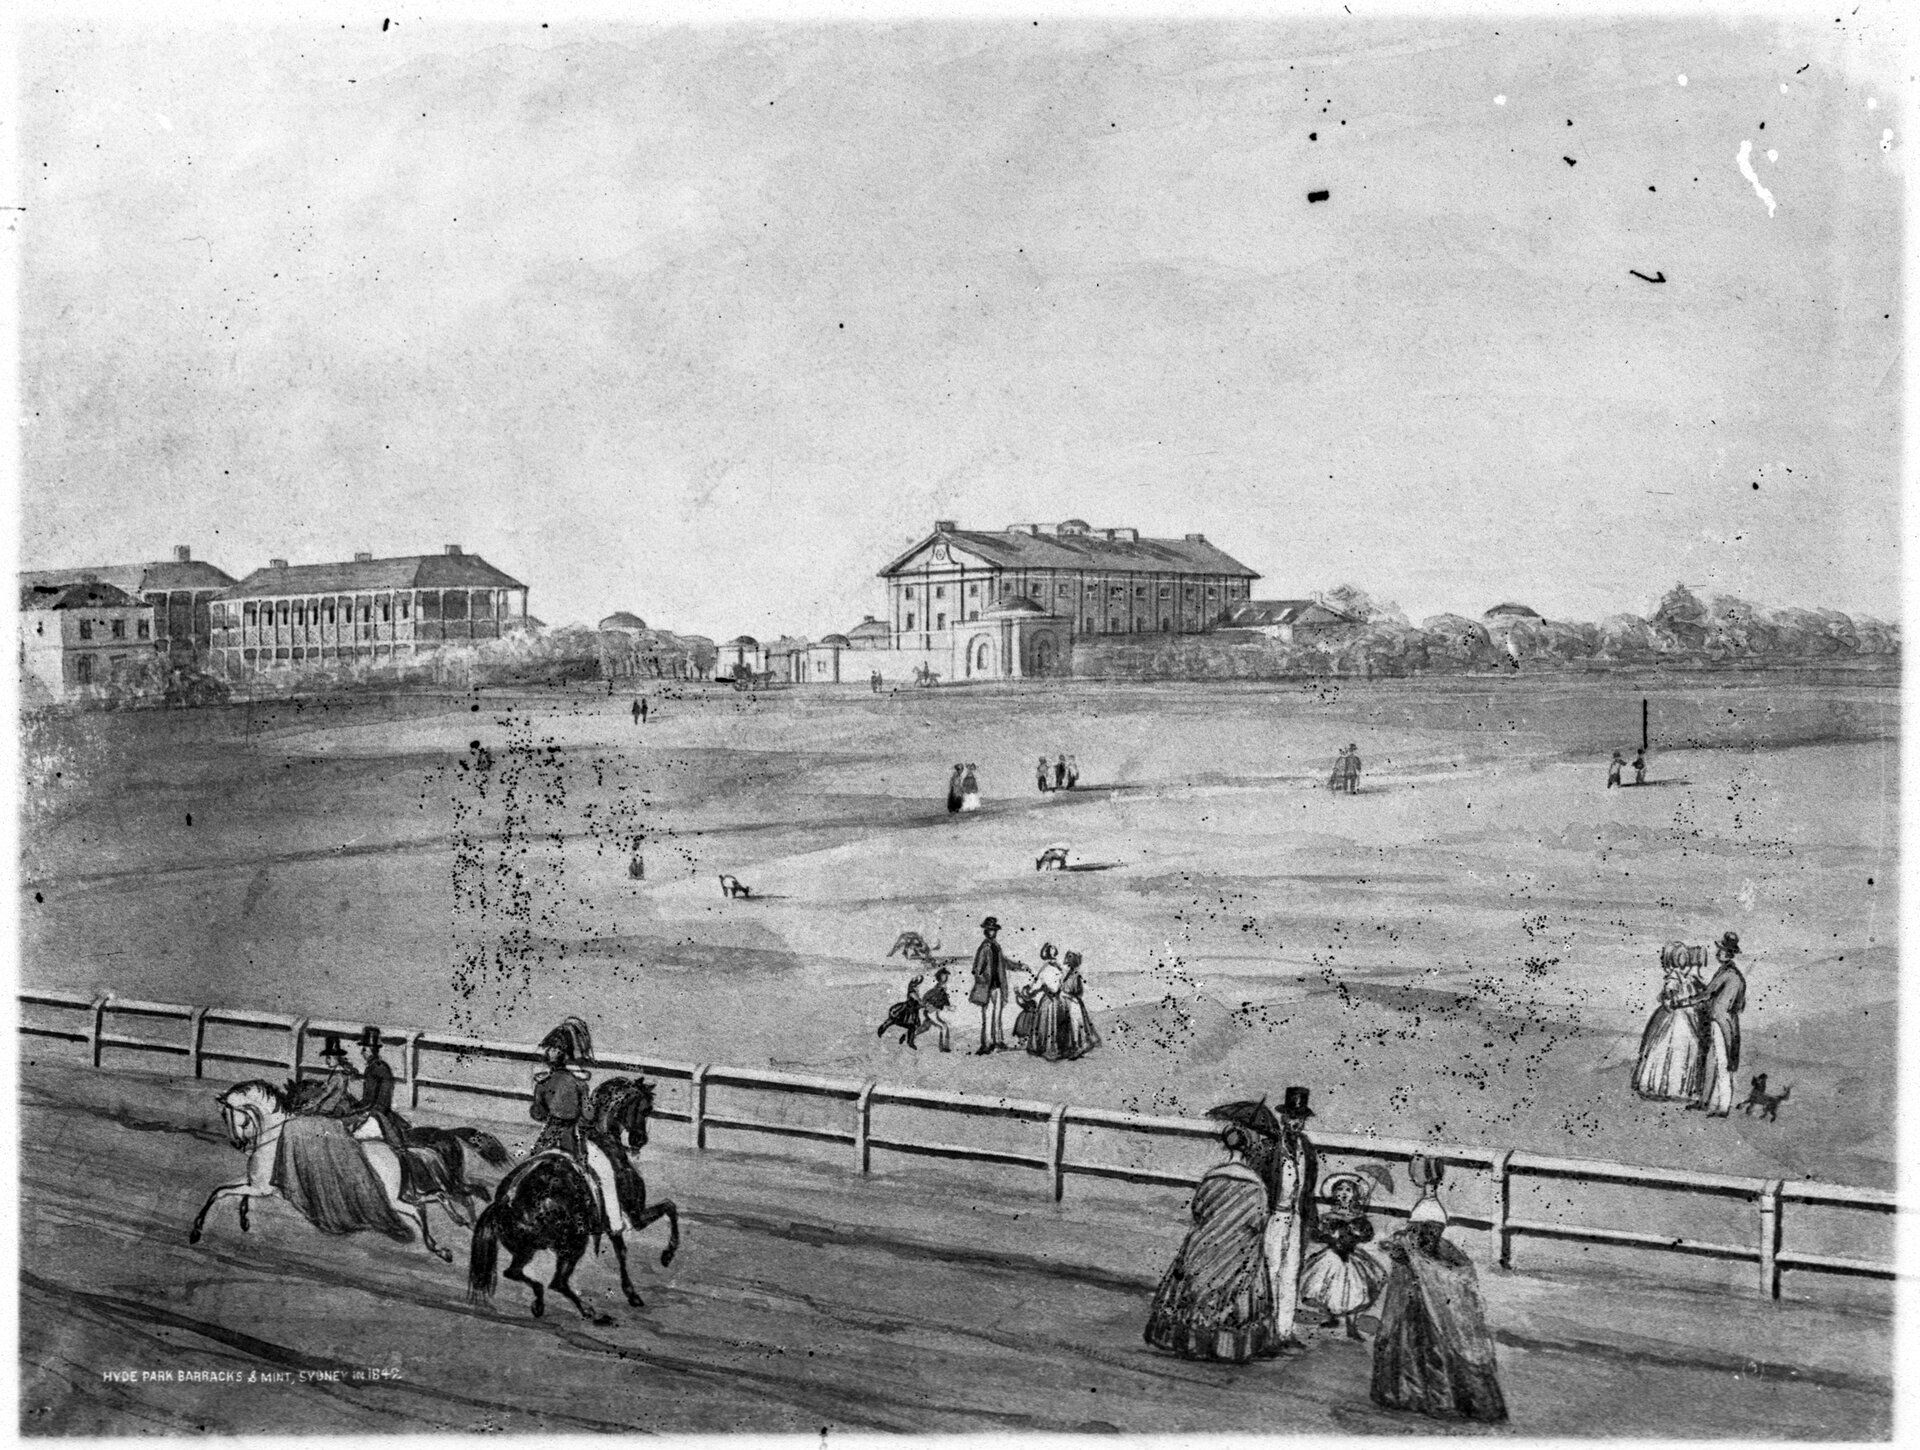 Sketch of Sydney in 1842 showing Hyde Park Barracks and the Mint in the background